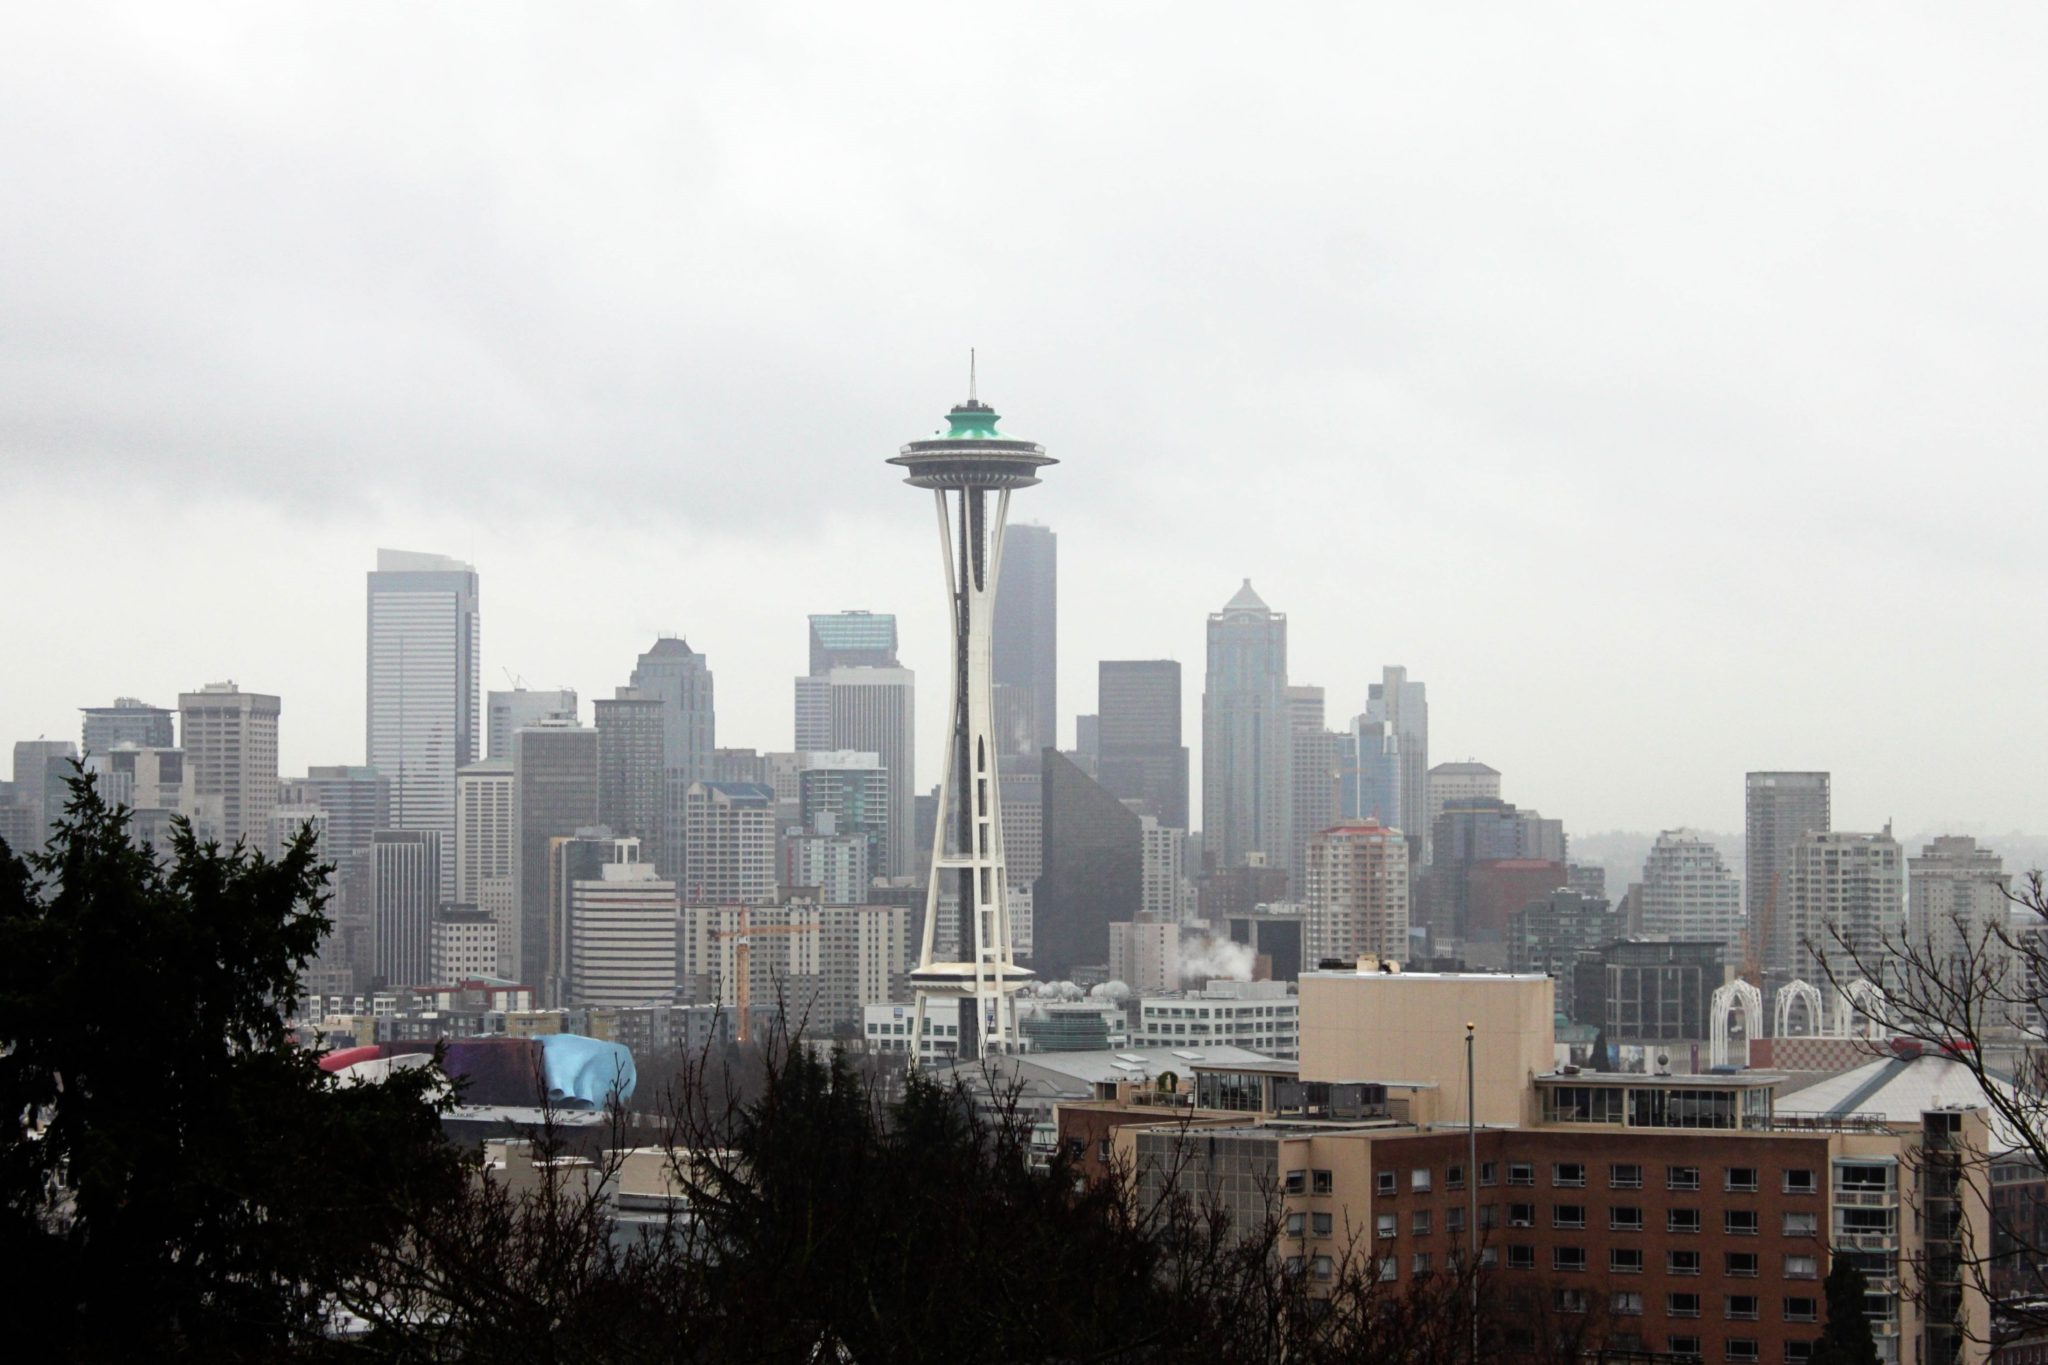 Kerry Park is the best places to go for scenic views of the Seattle skyline- 10 things to do in Seattle with kids #Seattle #washington #kerrypark